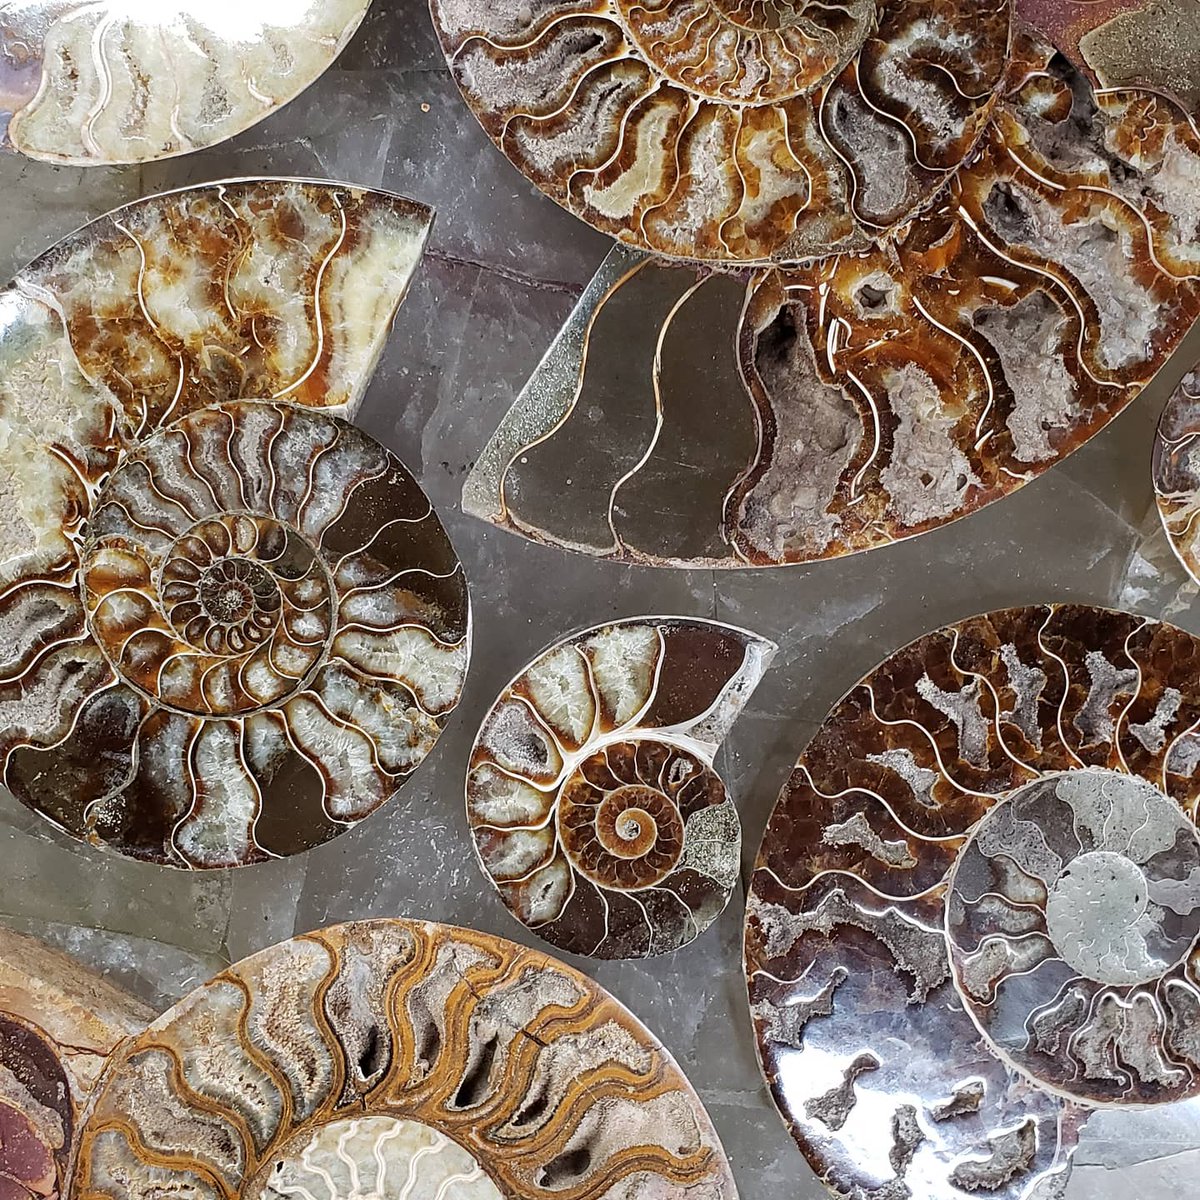 Our ammonites are outta this world! Or, well, from really deep in this world. All sizes, all kinds: Polished and sliced pairs, raw and whole, tiny and huge. You can even turn them into jewelry!

#Madagascar #fossils #ammonite #ammonitefossil #minerals #geology #HomeDecor #nature